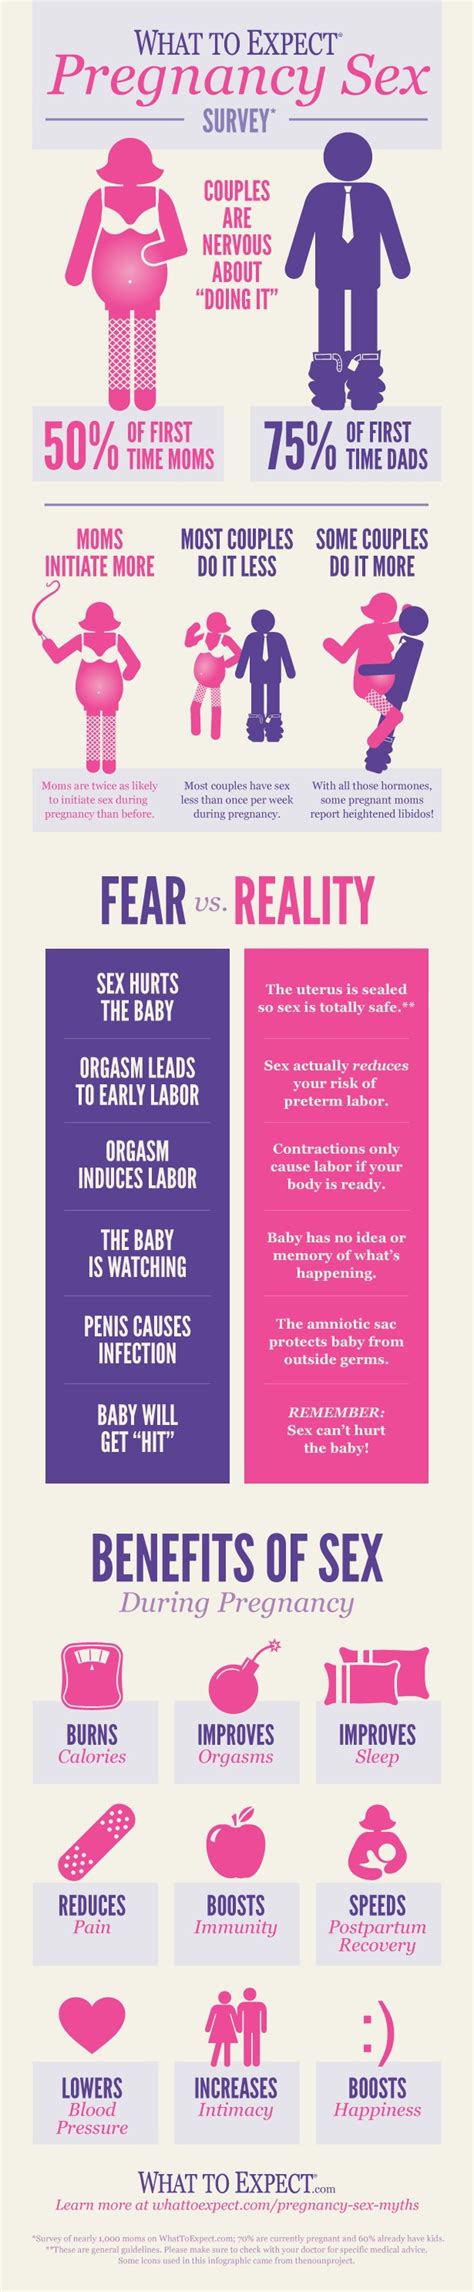 Sex During Pregnancy A Survey Infographic